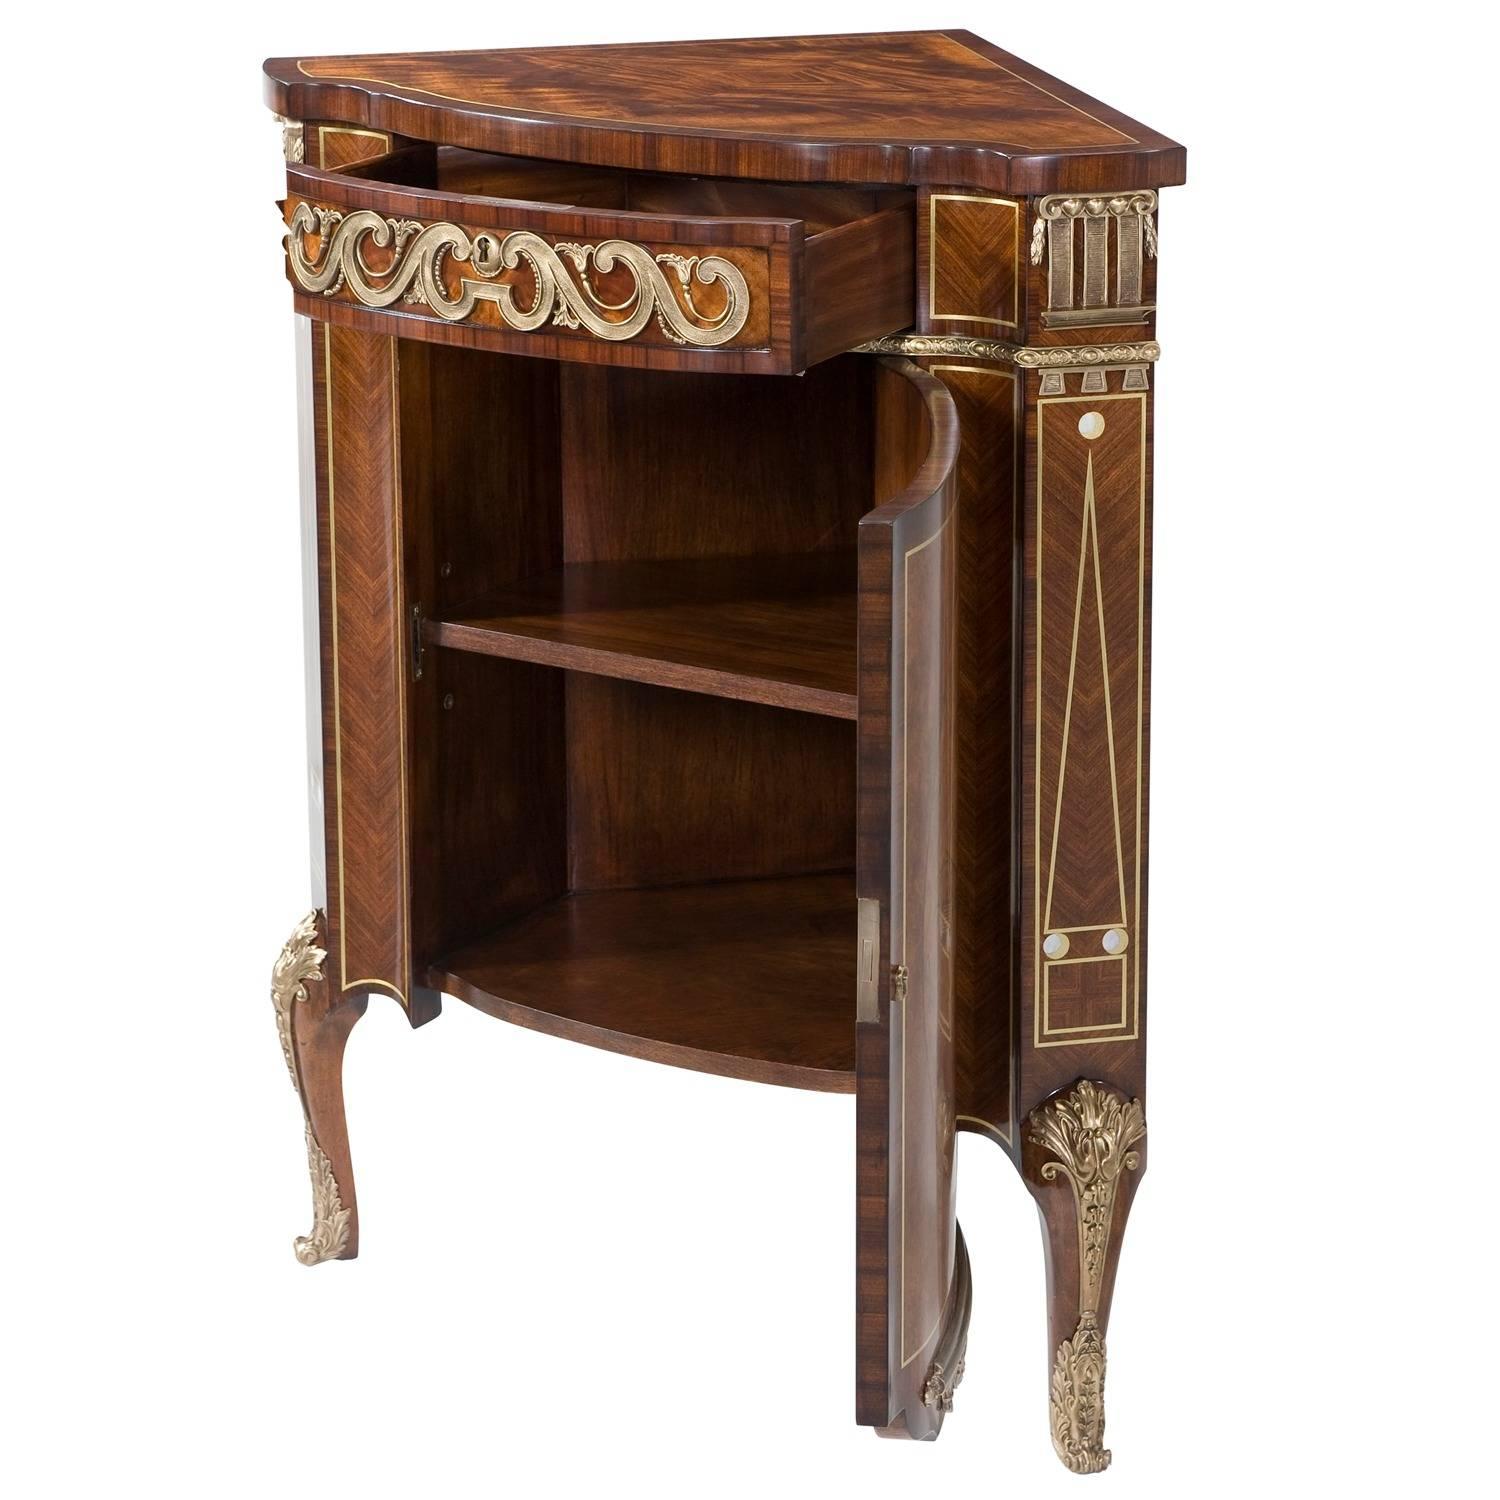 A mahogany, rosewood, laurel burl and pollard oak burl, brass and mother-of-pearl inlaid corner cabinet, the brass-mounted frieze drawer above a musical trophy inlaid cabinet door enclosing an adjustable shelf, on cabriole legs. The original Louis